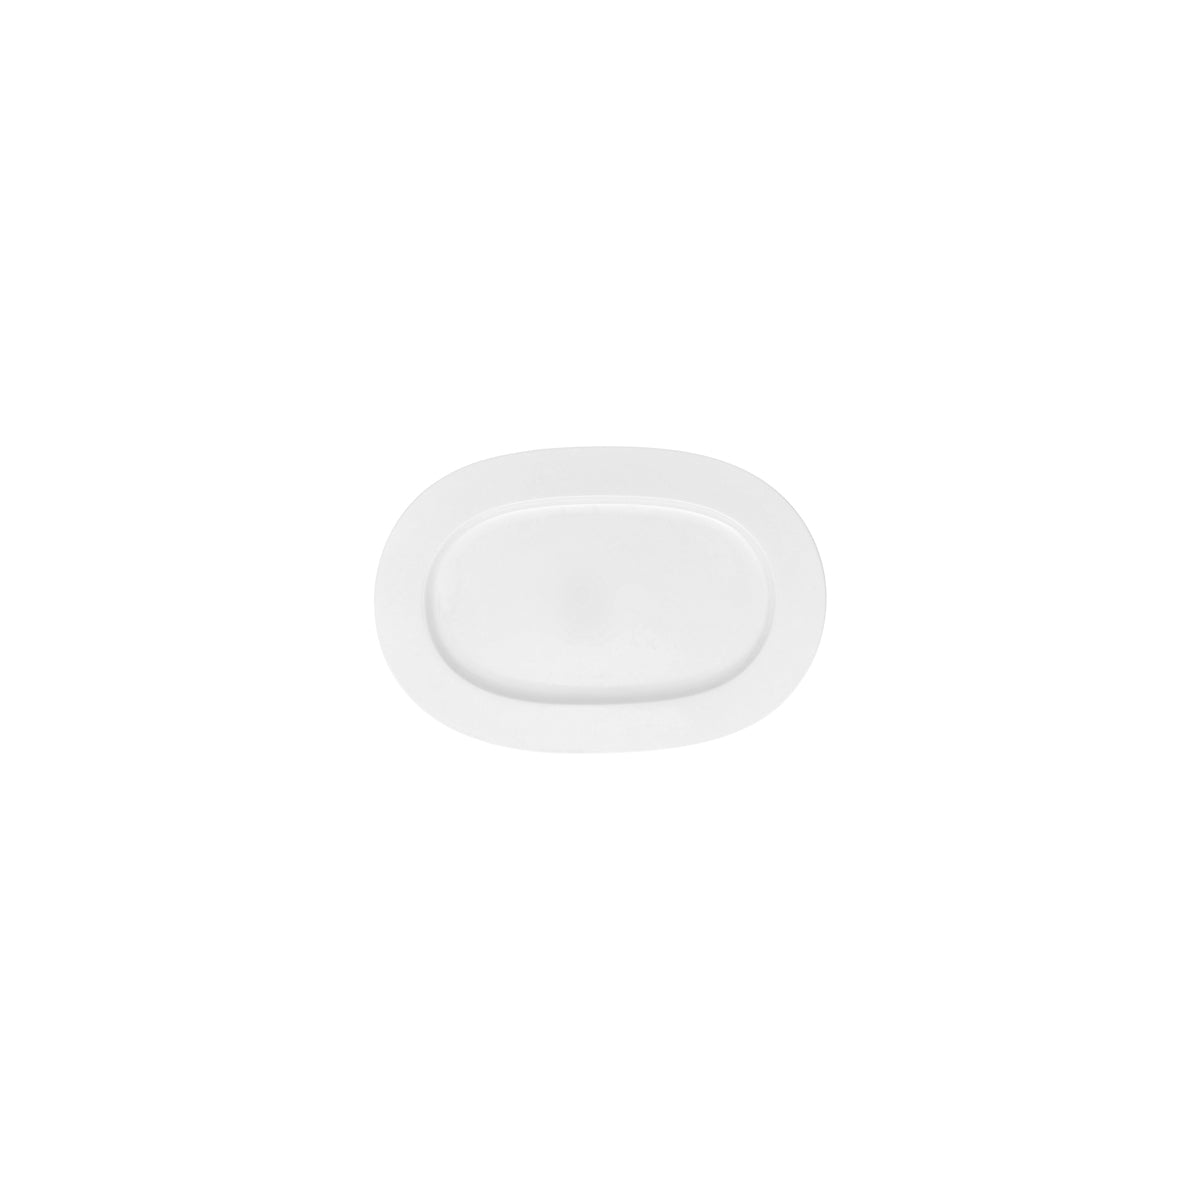 VB16-3272-3570 Villeroy And Boch Villeroy And Boch Stella Hotel White Oval Plate Wide Rim 200x140mm Tomkin Australia Hospitality Supplies